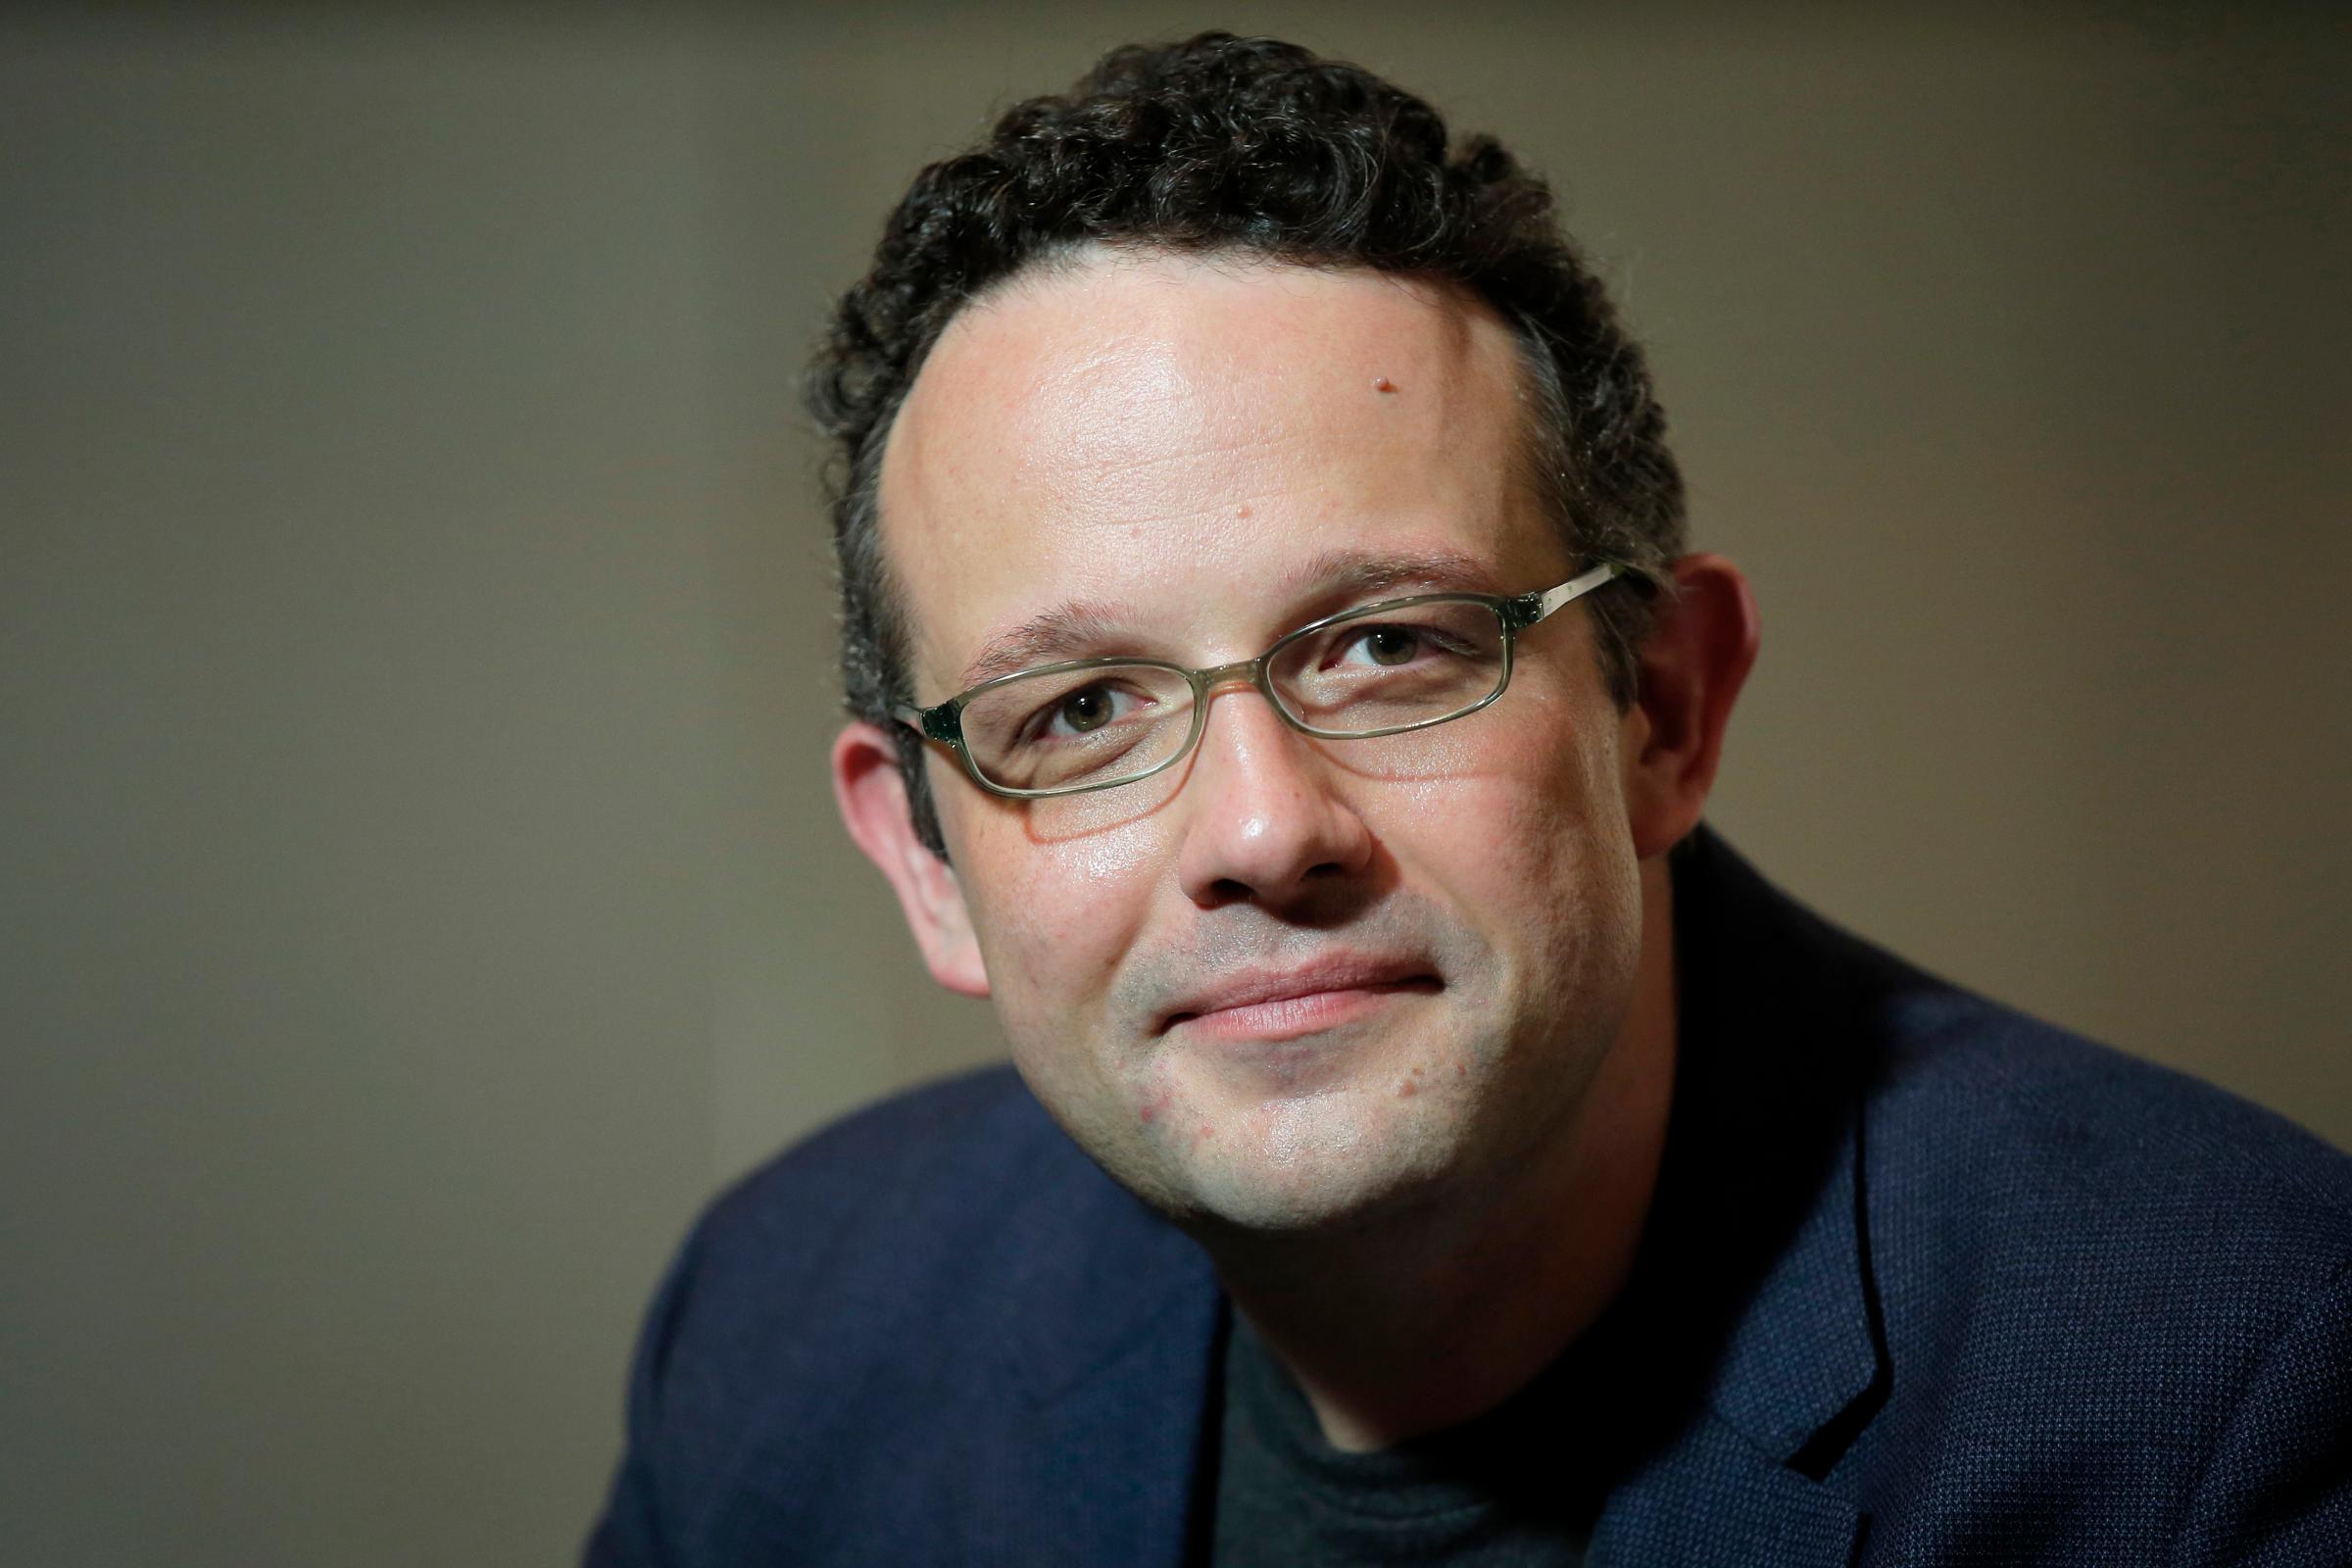 Phil Libin at an interview at the New Economy Summit 2015 in Tokyo on April 7, 2015.